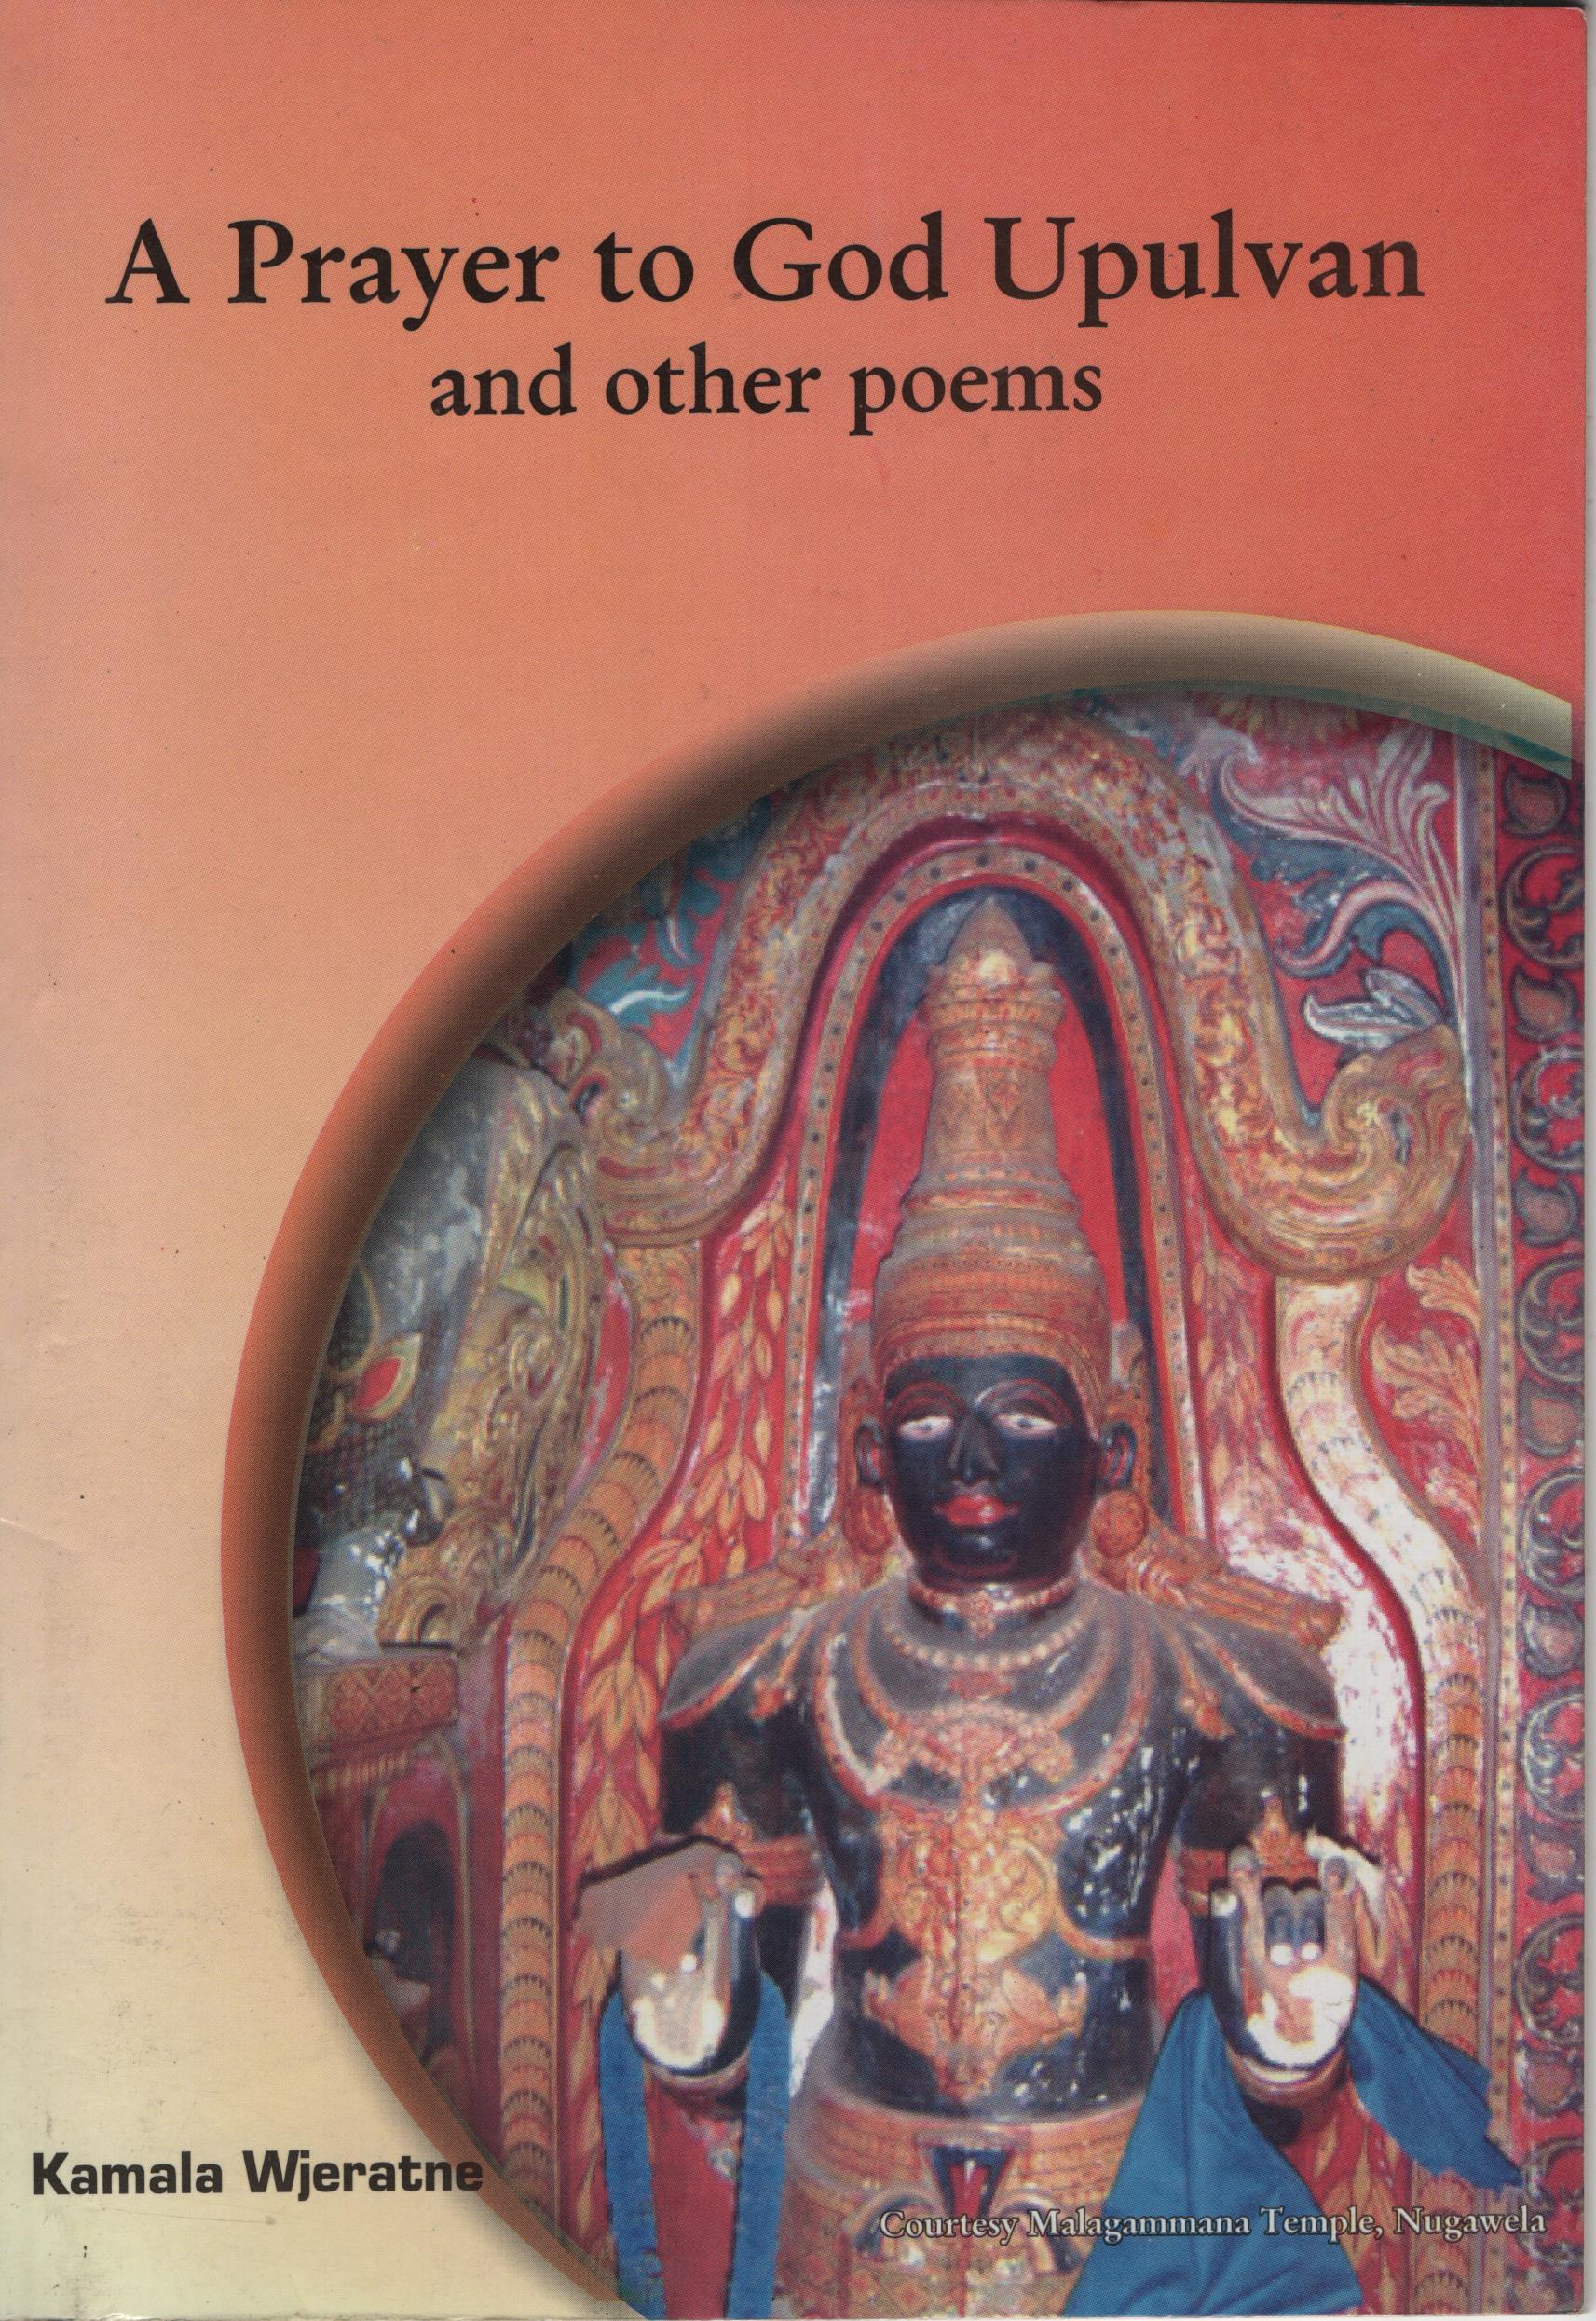 A Prayer to God Upulvan: A Collection of Poems